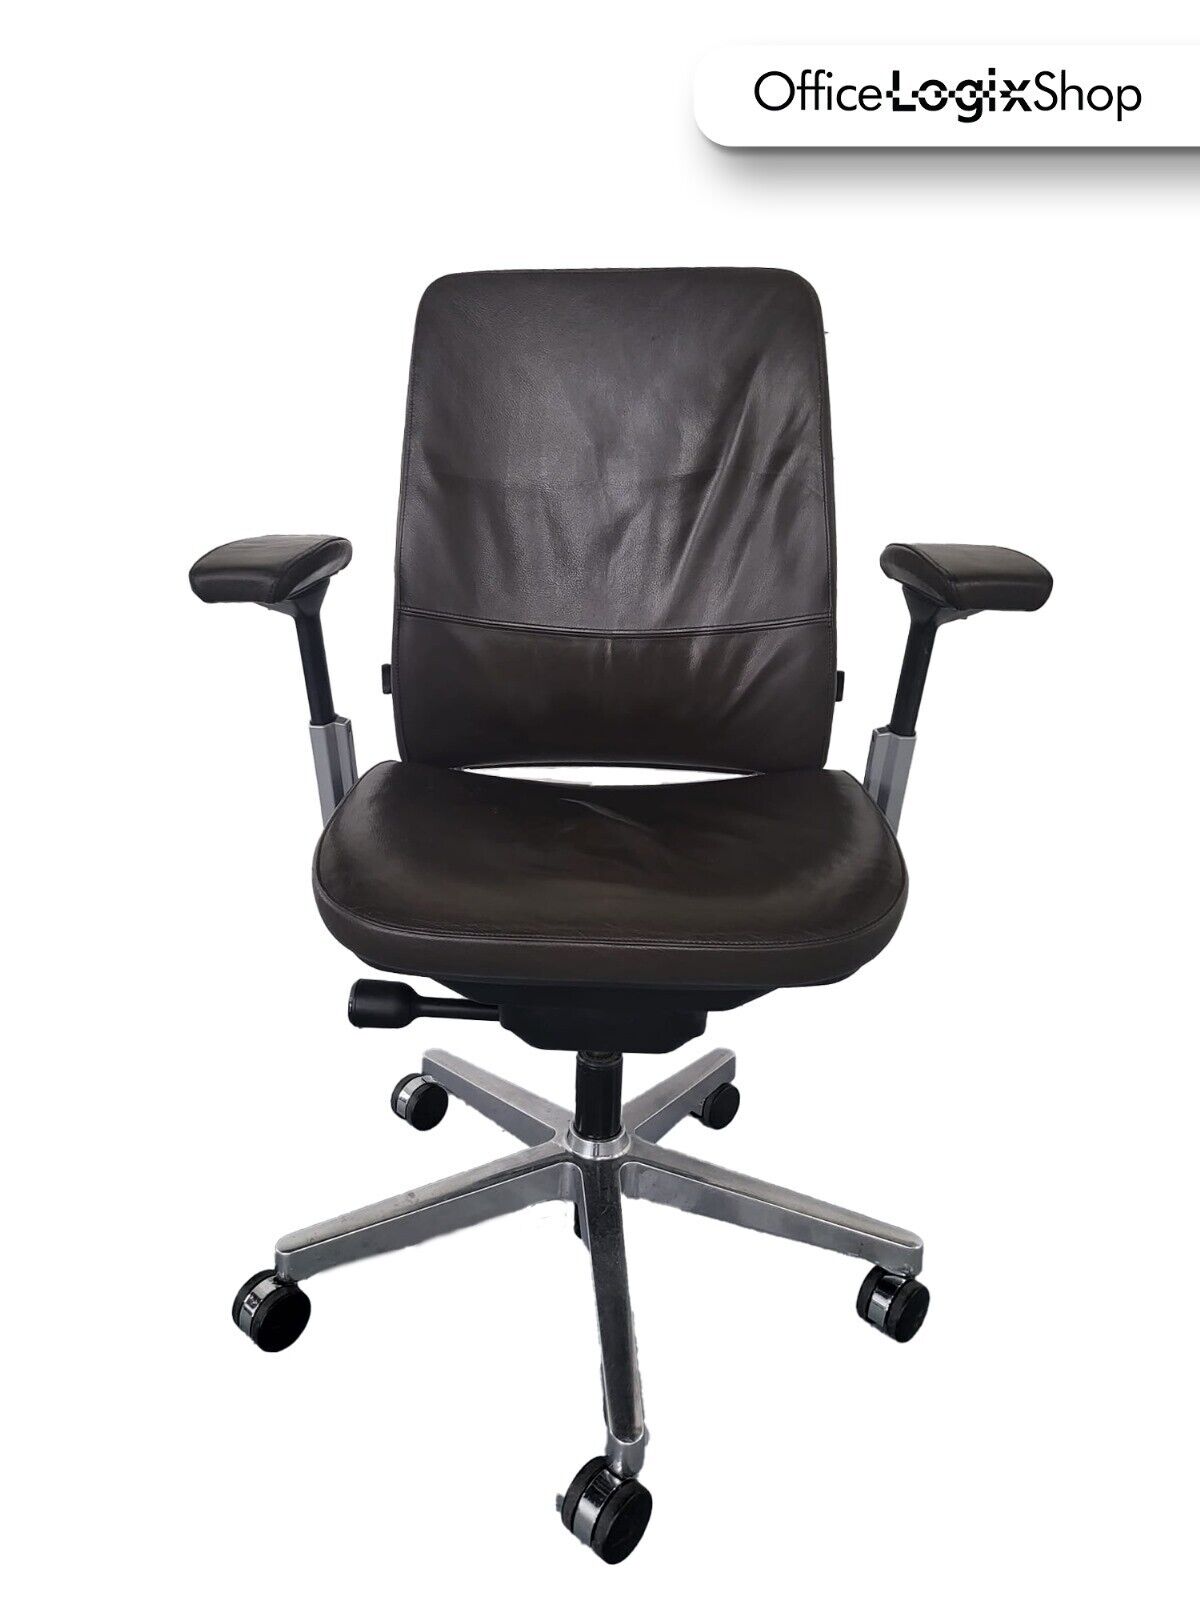 Steelcase Amia (Leap V2) Task Chair - Fully Adjustable - Brown Stitched Leather